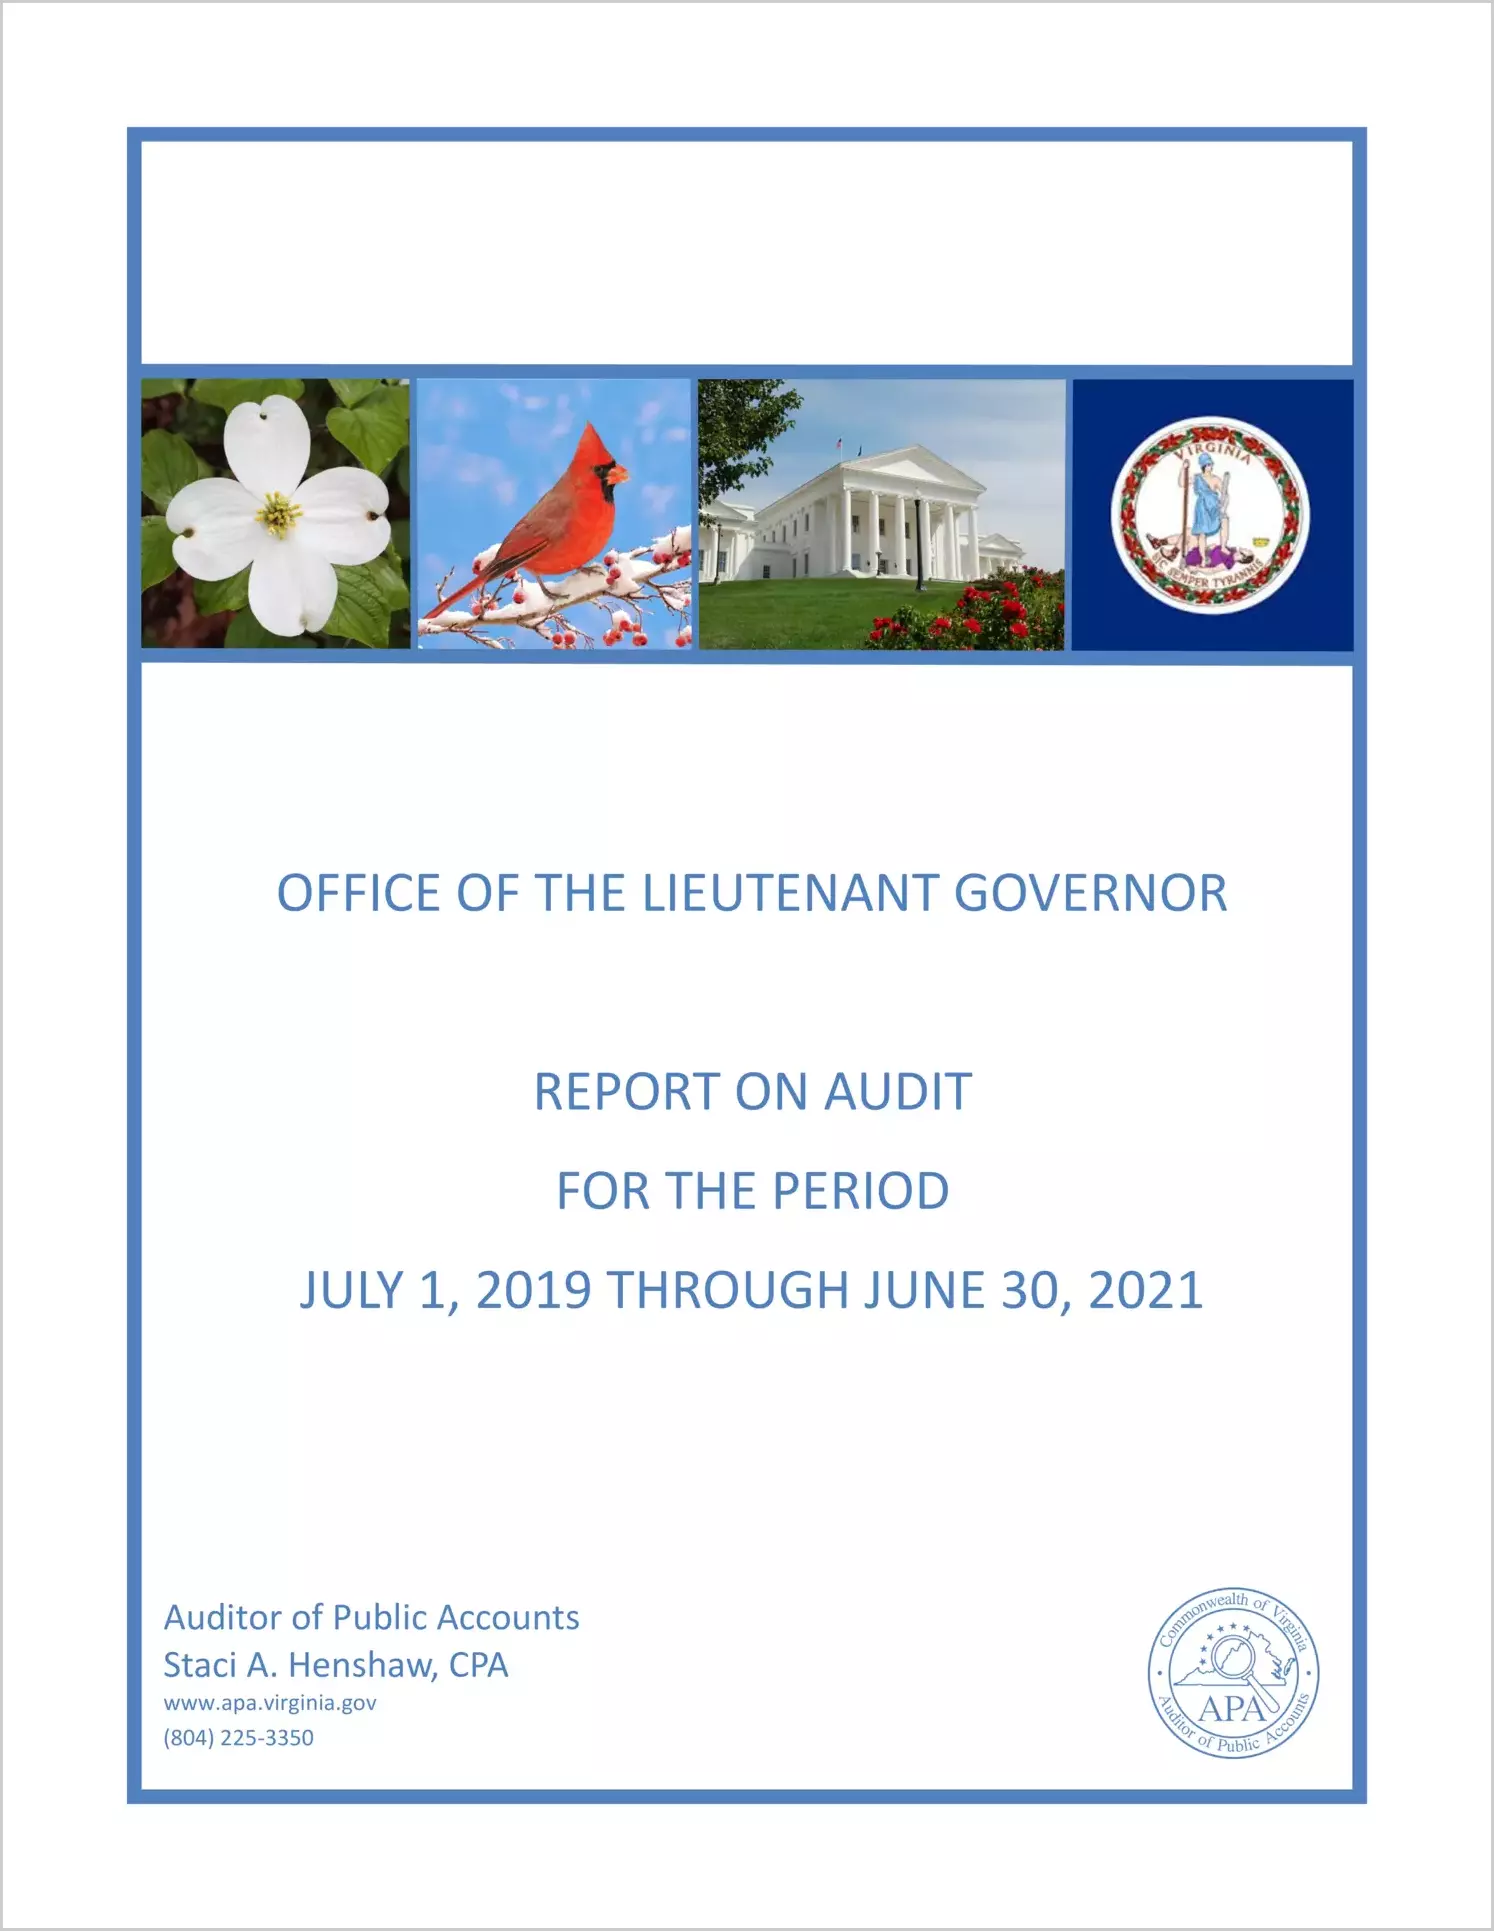 Office of the Lieutenant Governor for the period July 1, 2019 through June 30, 2021